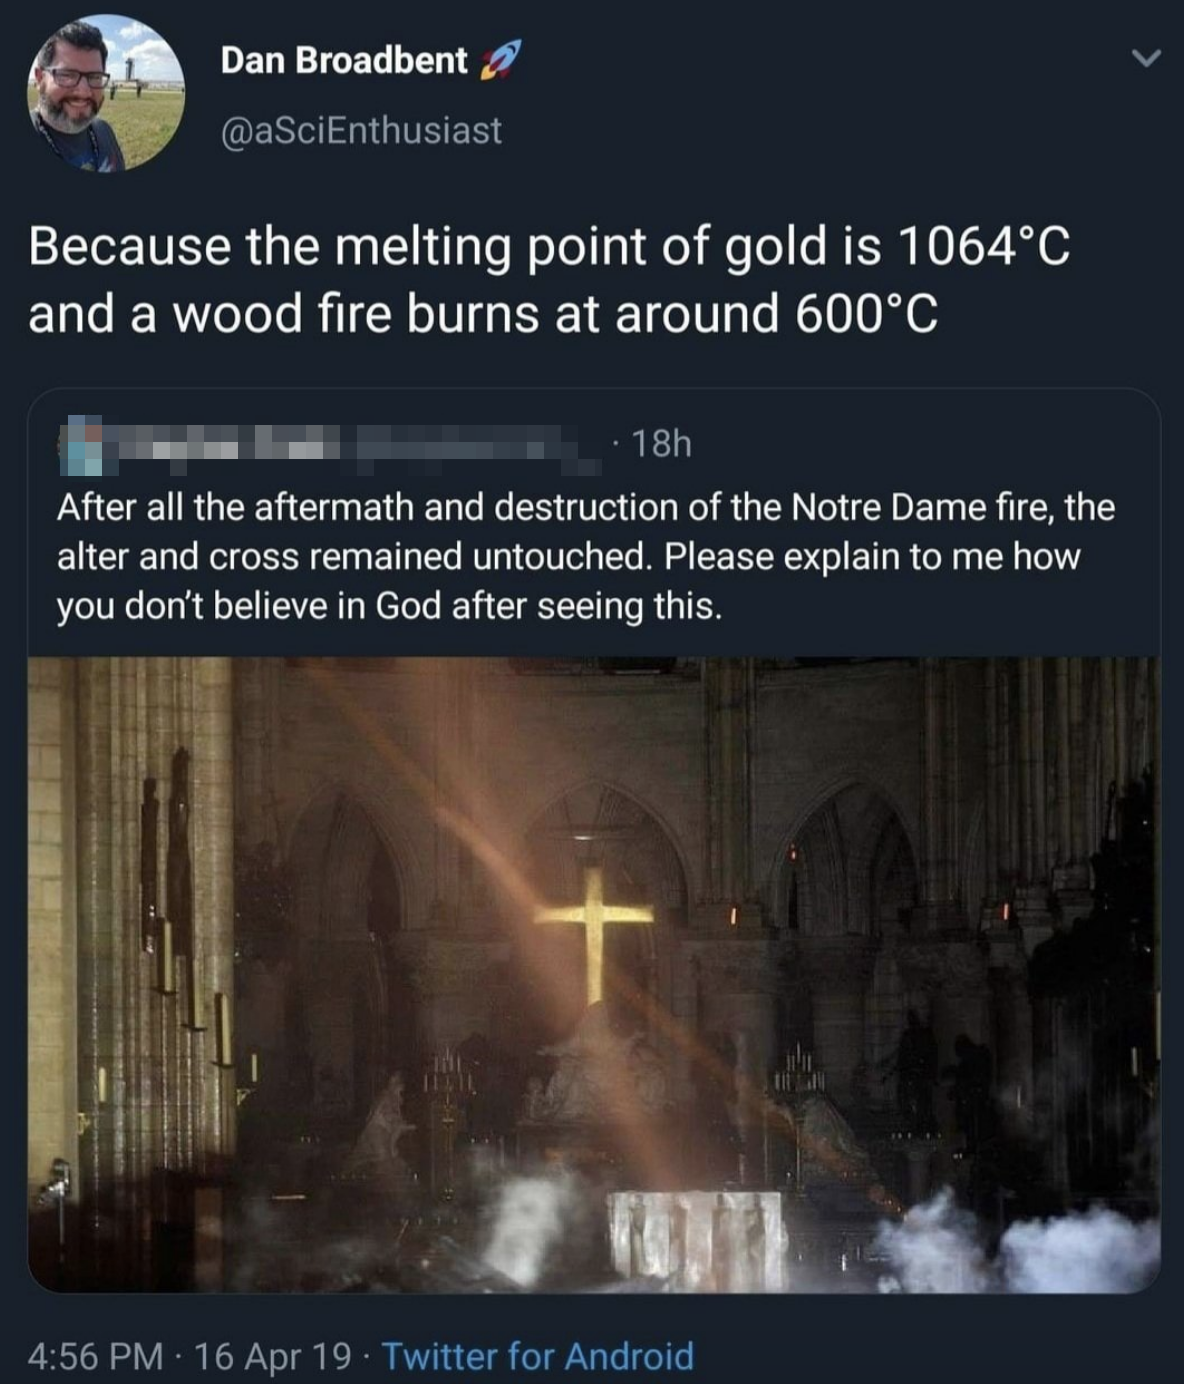 A tweet saying that it was a miracle that the altar and cross survived the Notre Dame fire, with a response saying that it&#x27;s because the melting point of gold is 1064 degrees celsius while wood burns at 600 degrees